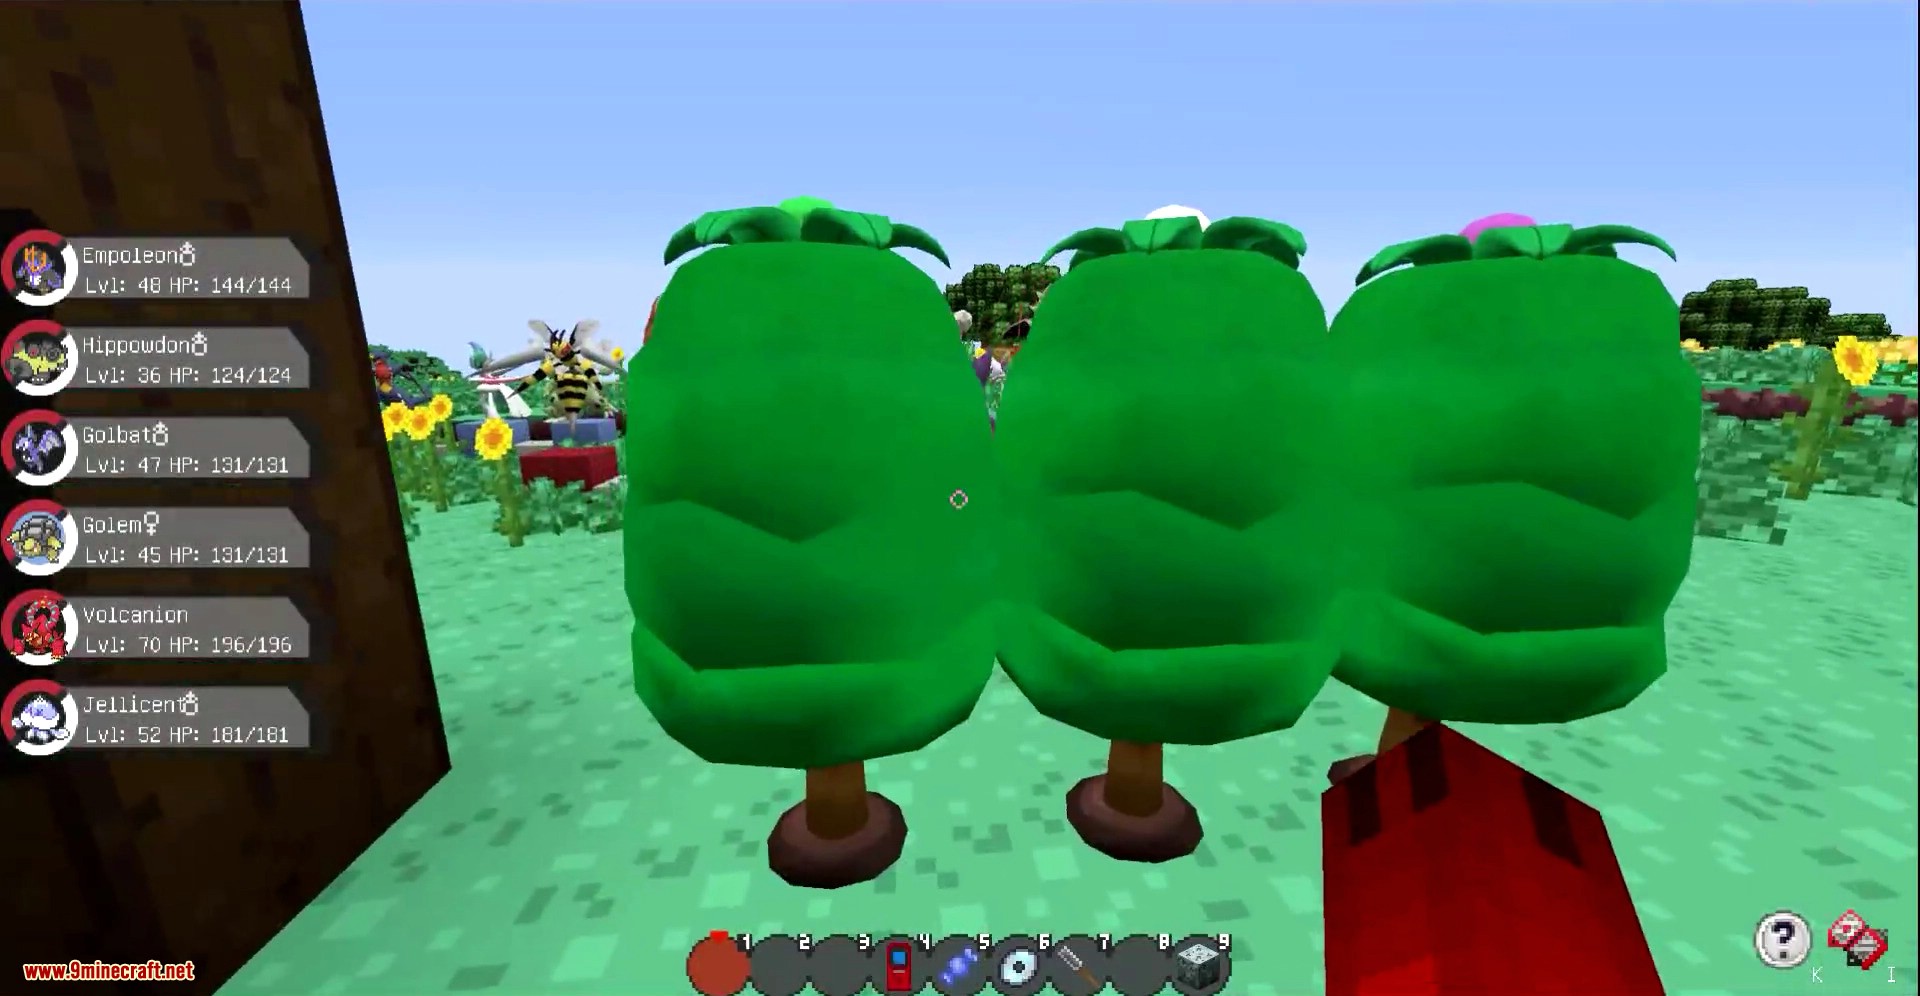 onhandig Mail Classificeren Pixelmon Is A Perfect Way To Play Catch Your Favorite Pokemon Inside  Minecraft!